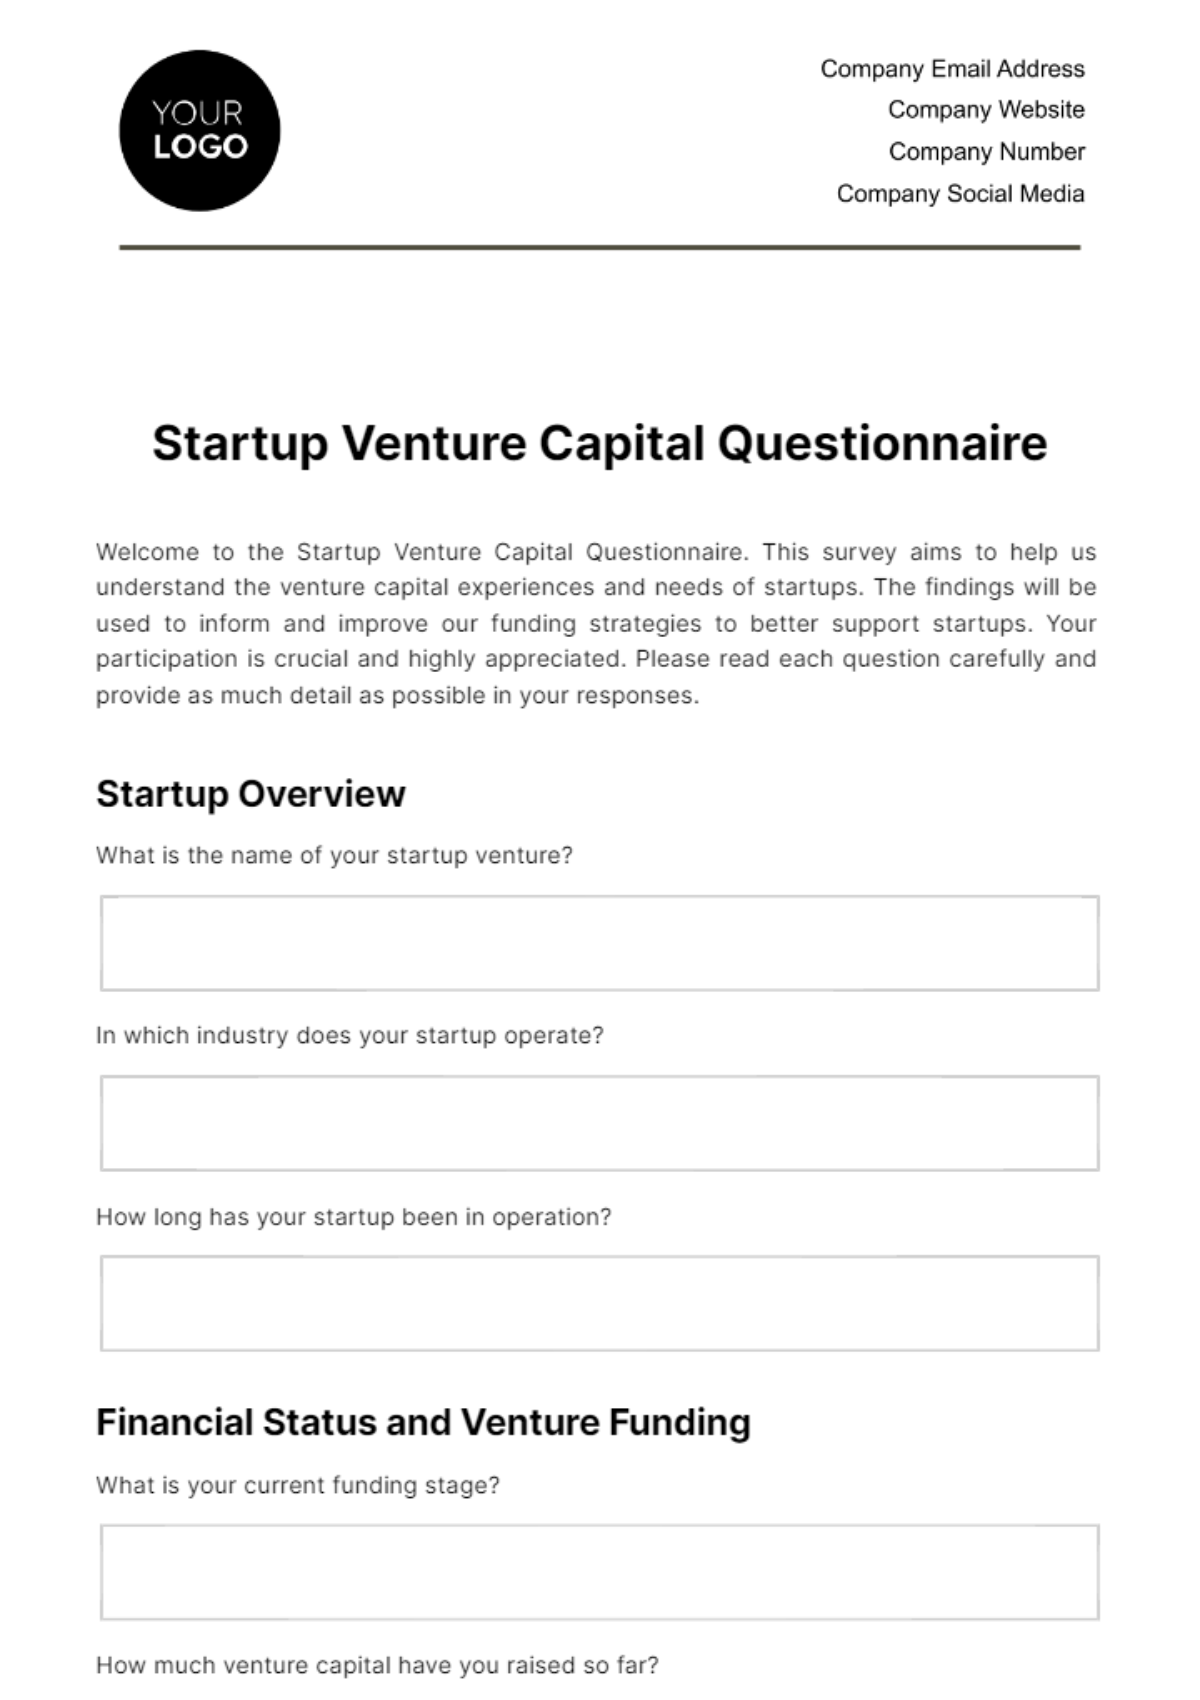 Free Startup Venture Capital Questionnaire Template